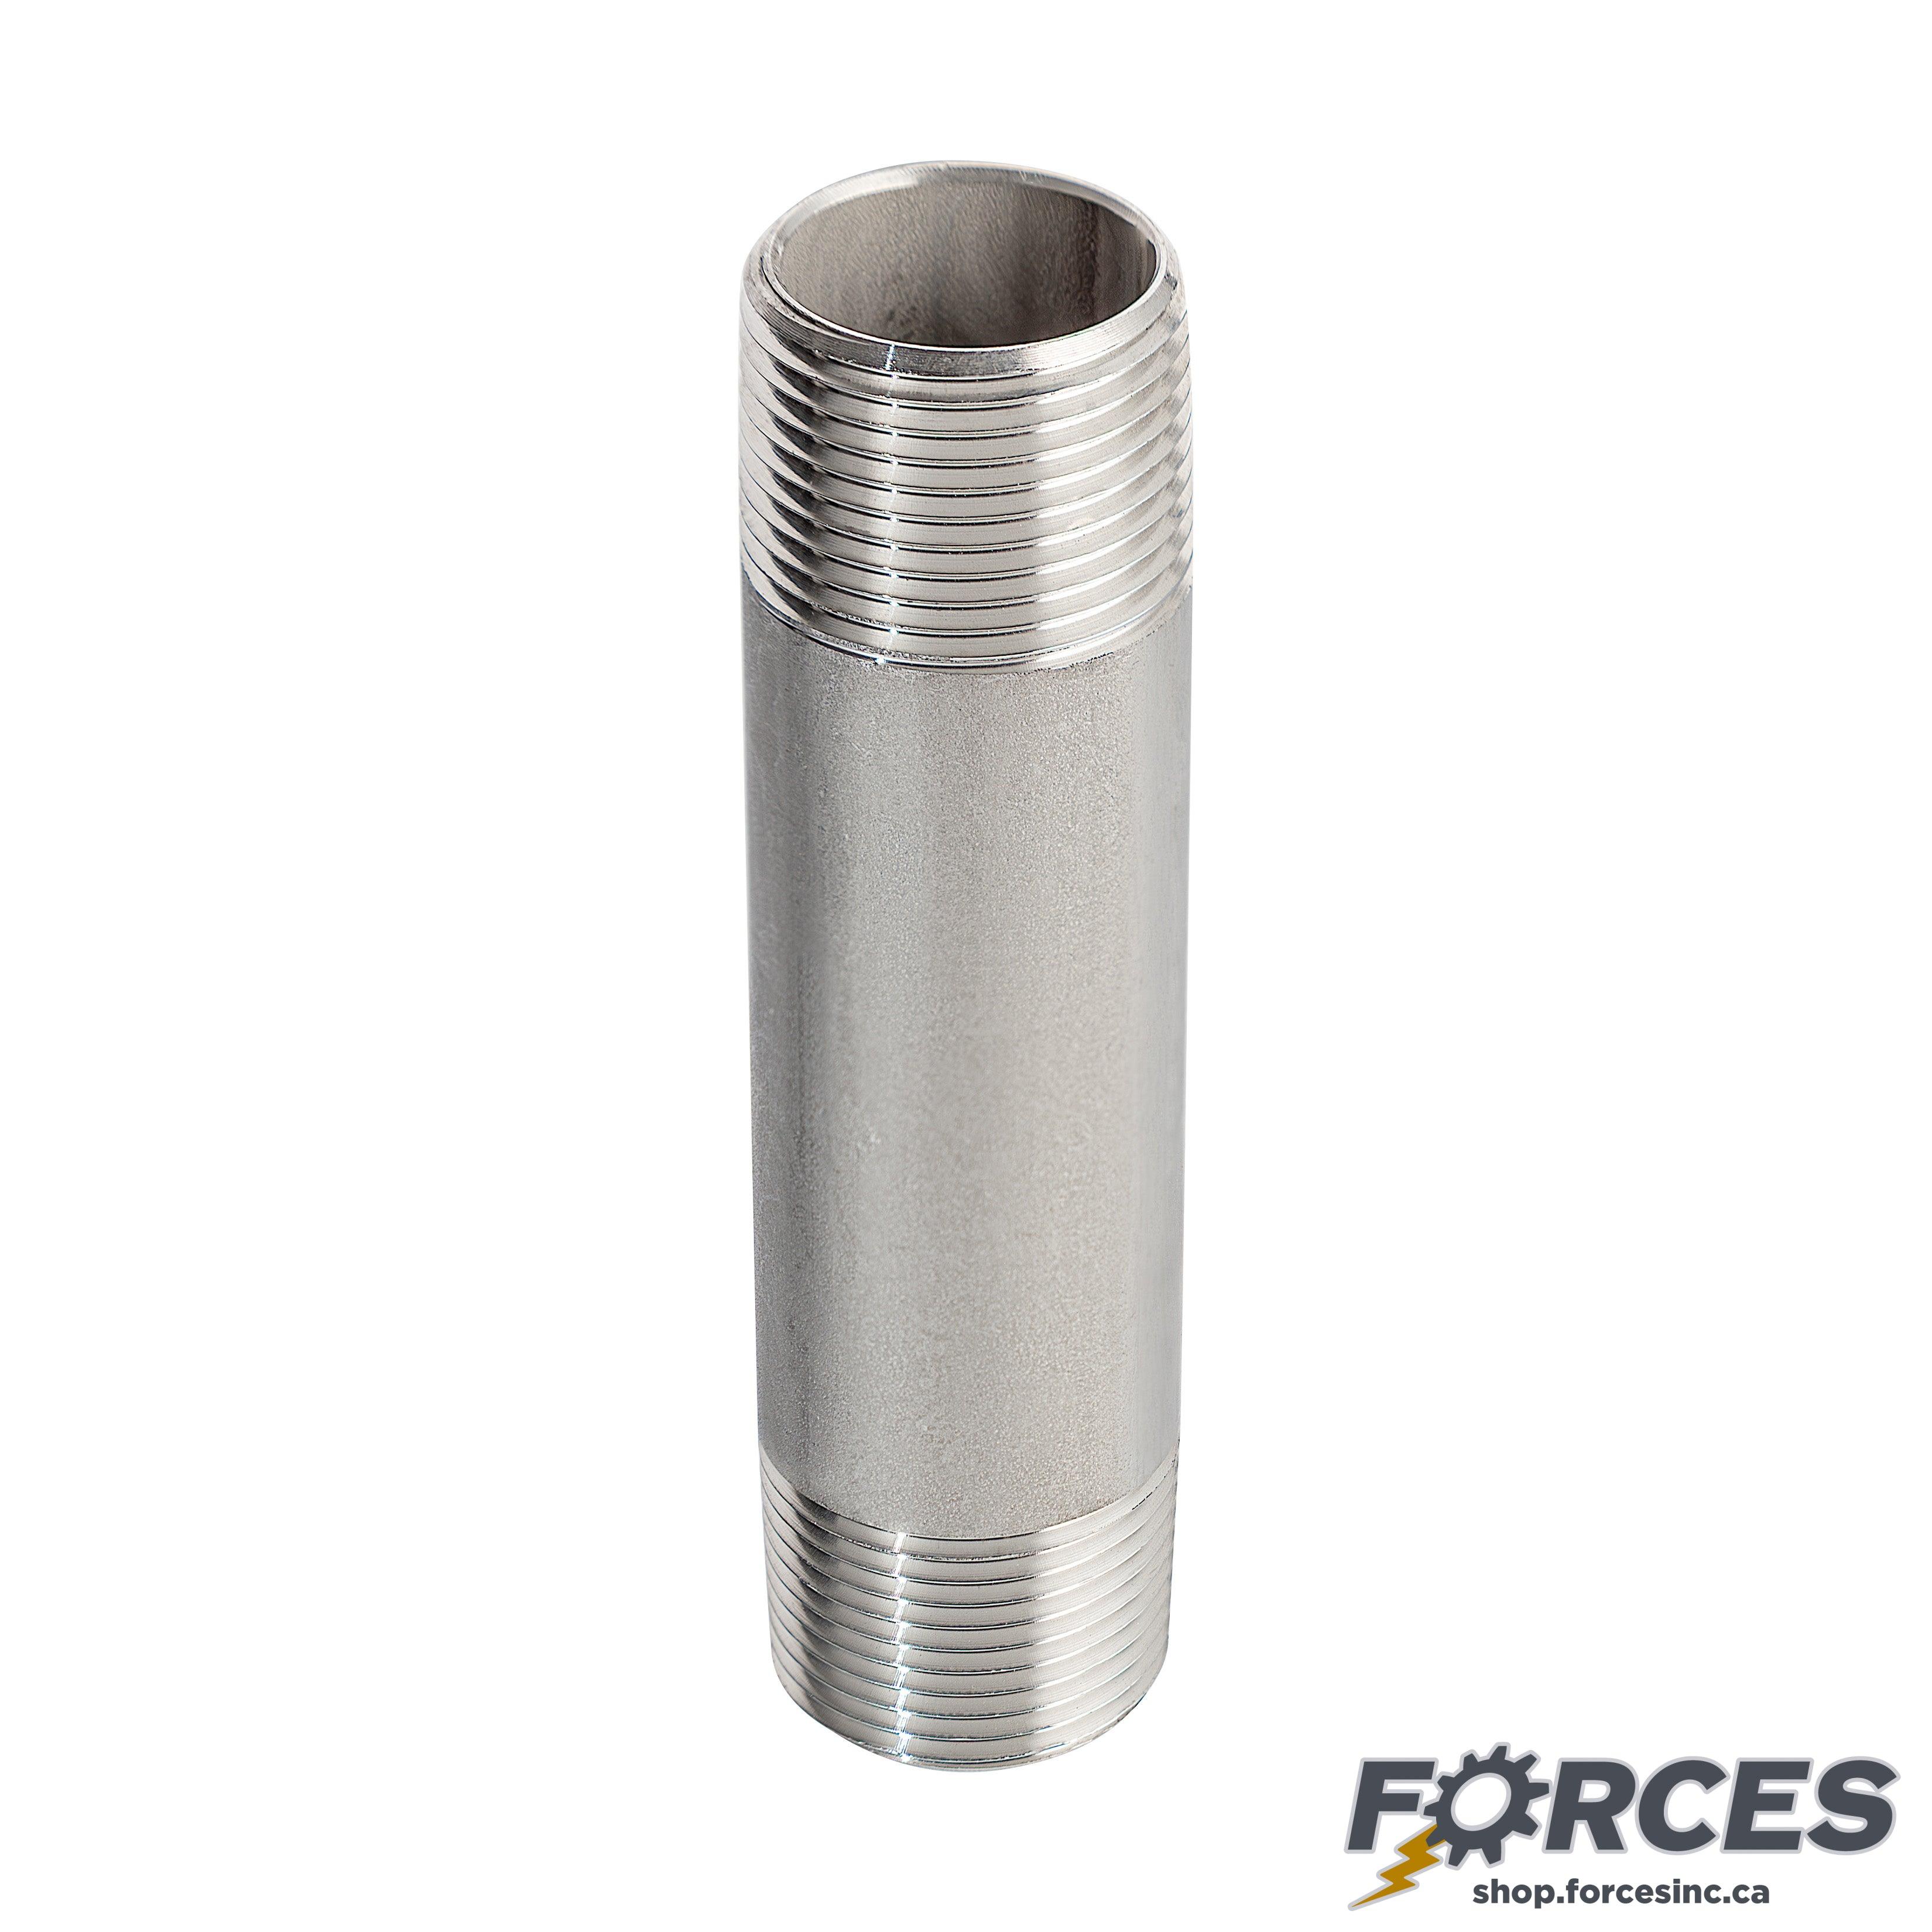 1" X 10" Long Nipple - Stainless Steel 316 - Forces Inc